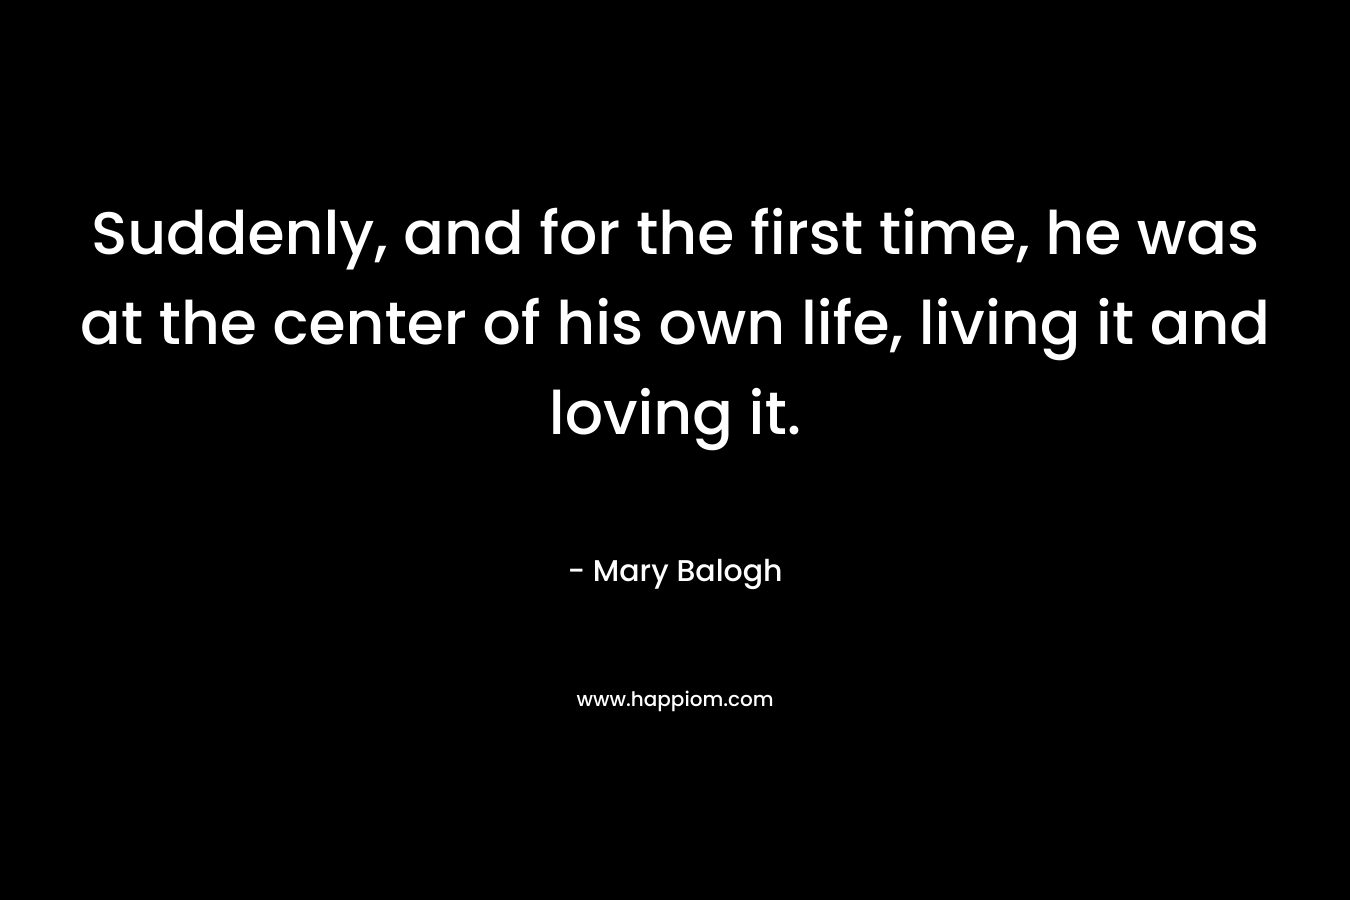 Suddenly, and for the first time, he was at the center of his own life, living it and loving it. – Mary Balogh